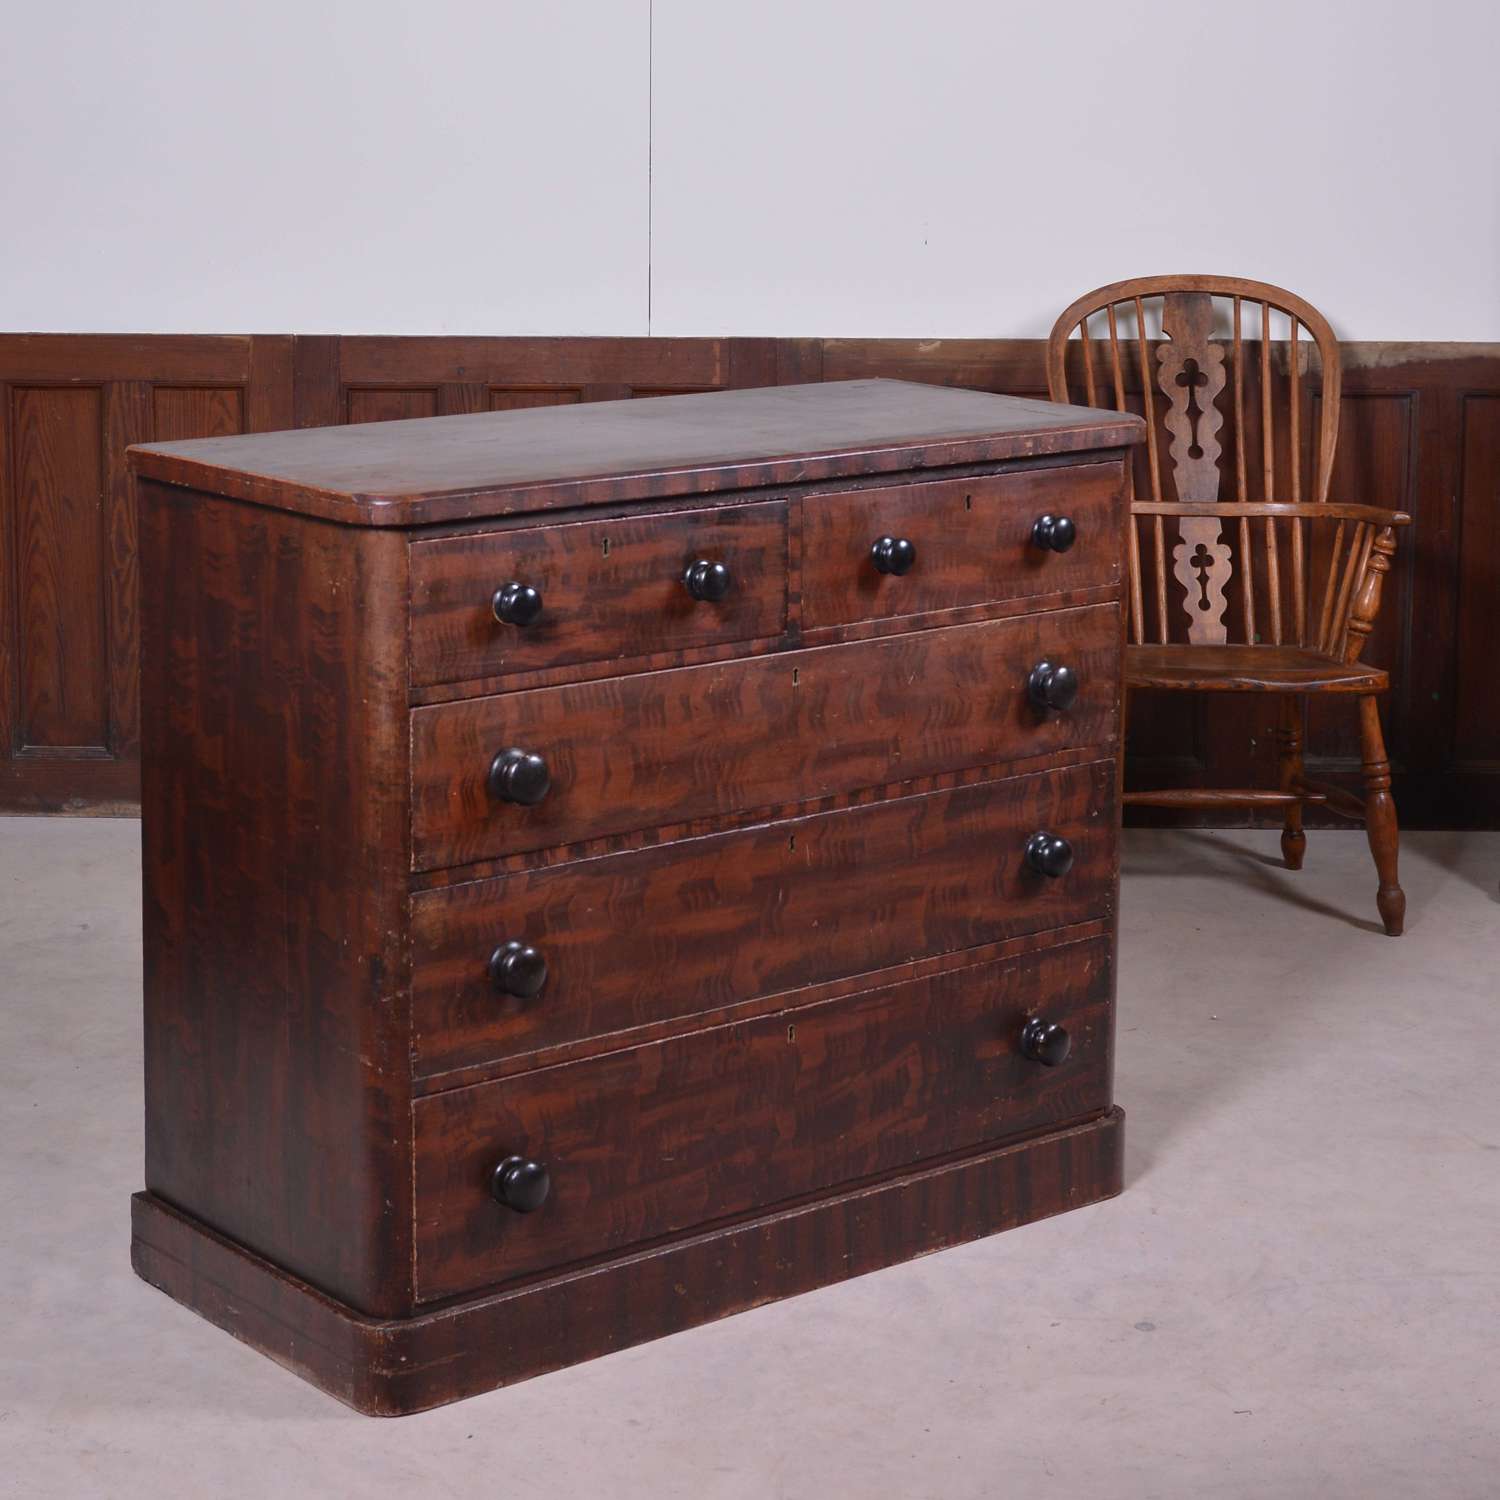 19th Century hand painted pine chest of drawers